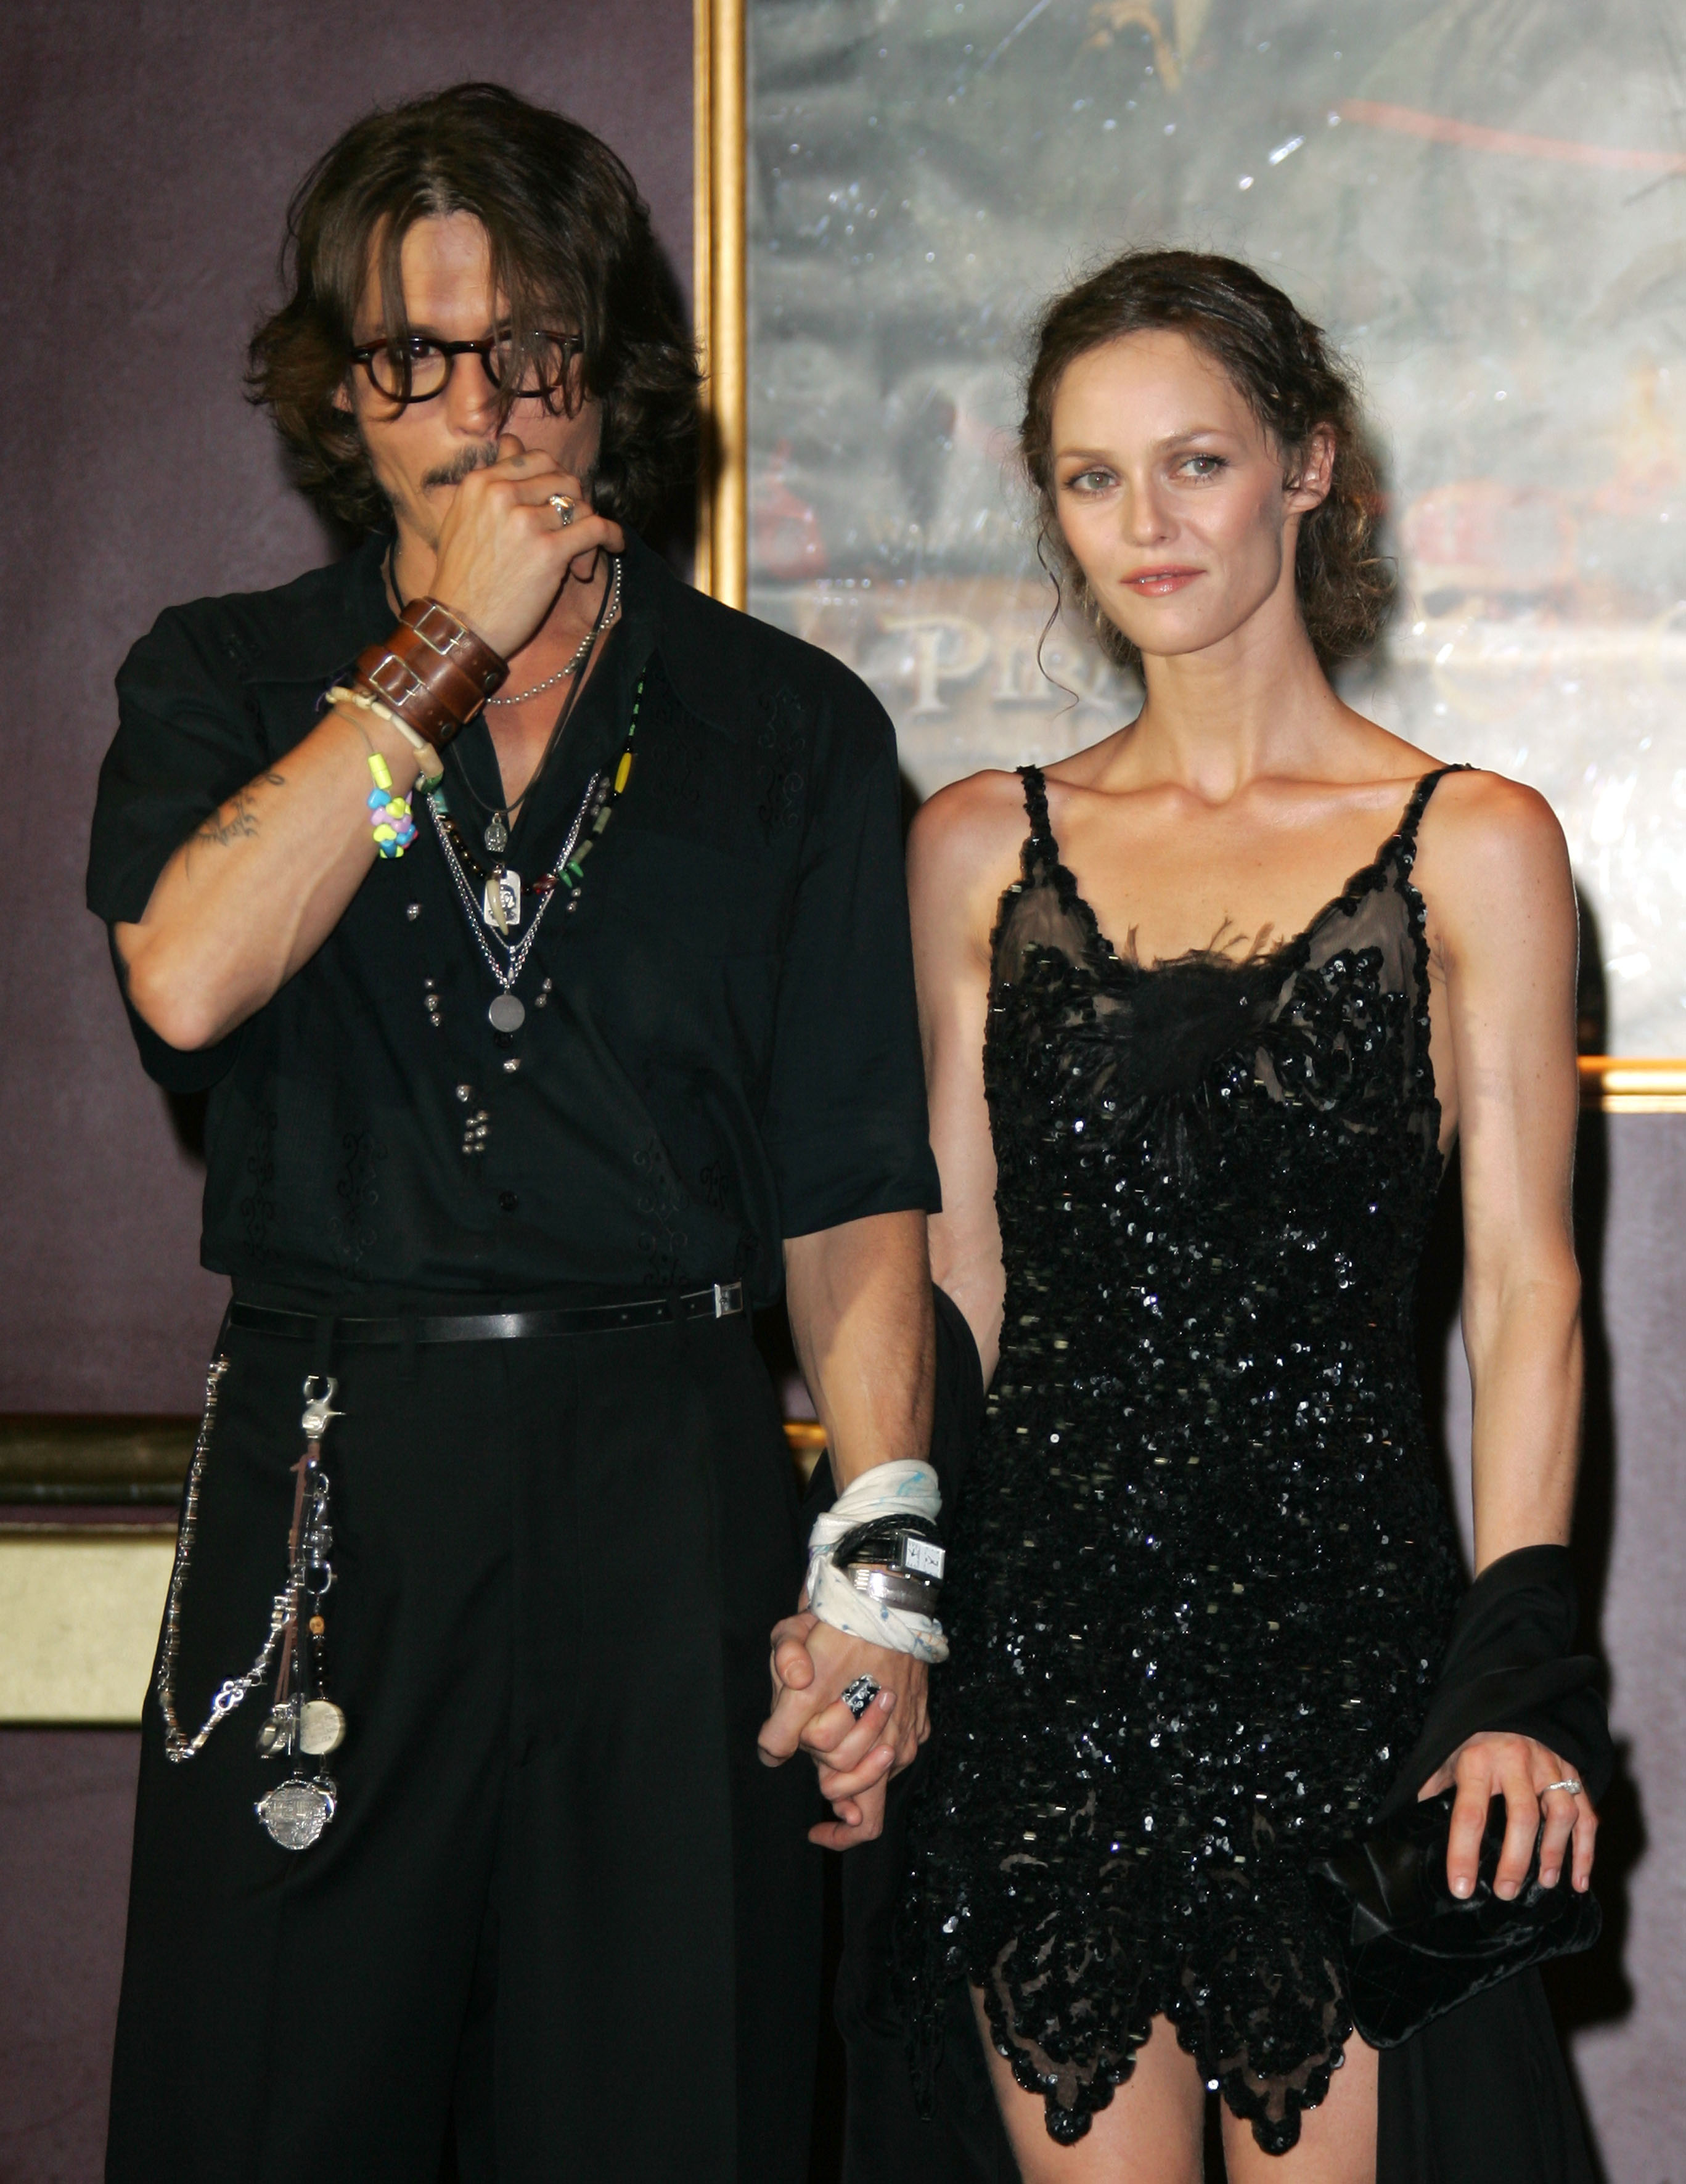 Johnny Depp and Vanessa Paradis at "Pirates of The Caribbean: Dead Man's Chest" Paris Premiere | Source: Getty Images